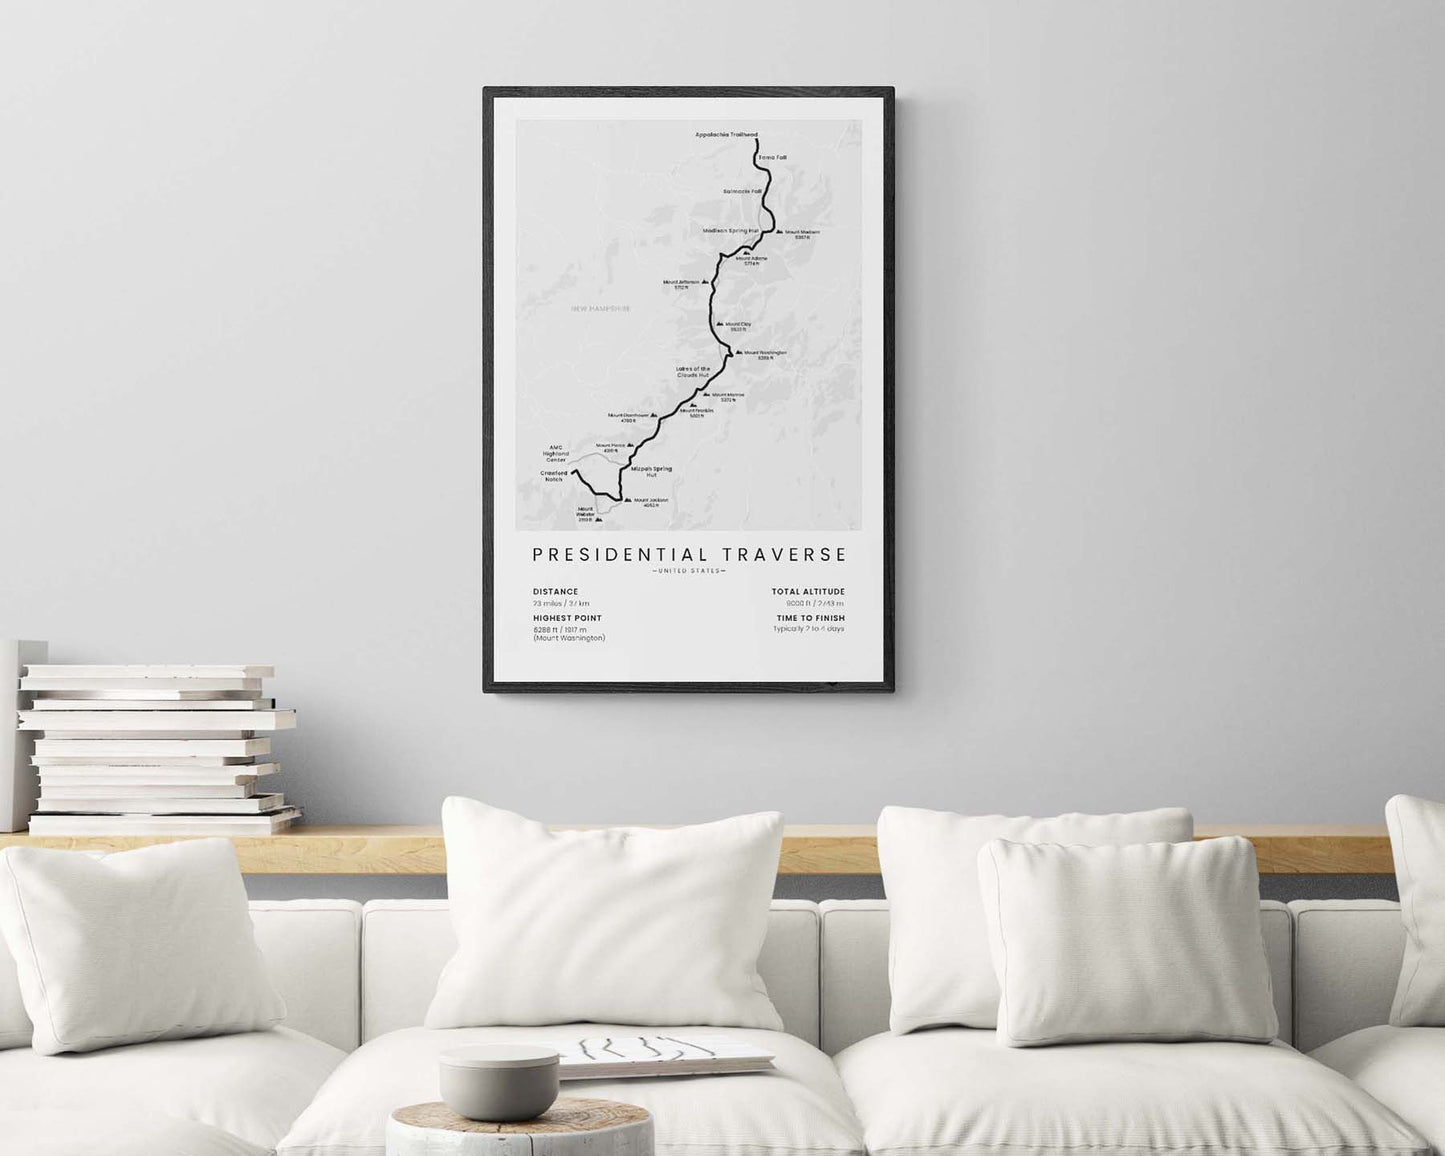 Presidental Traverse (united states) trail map poster with white background in modern room decor